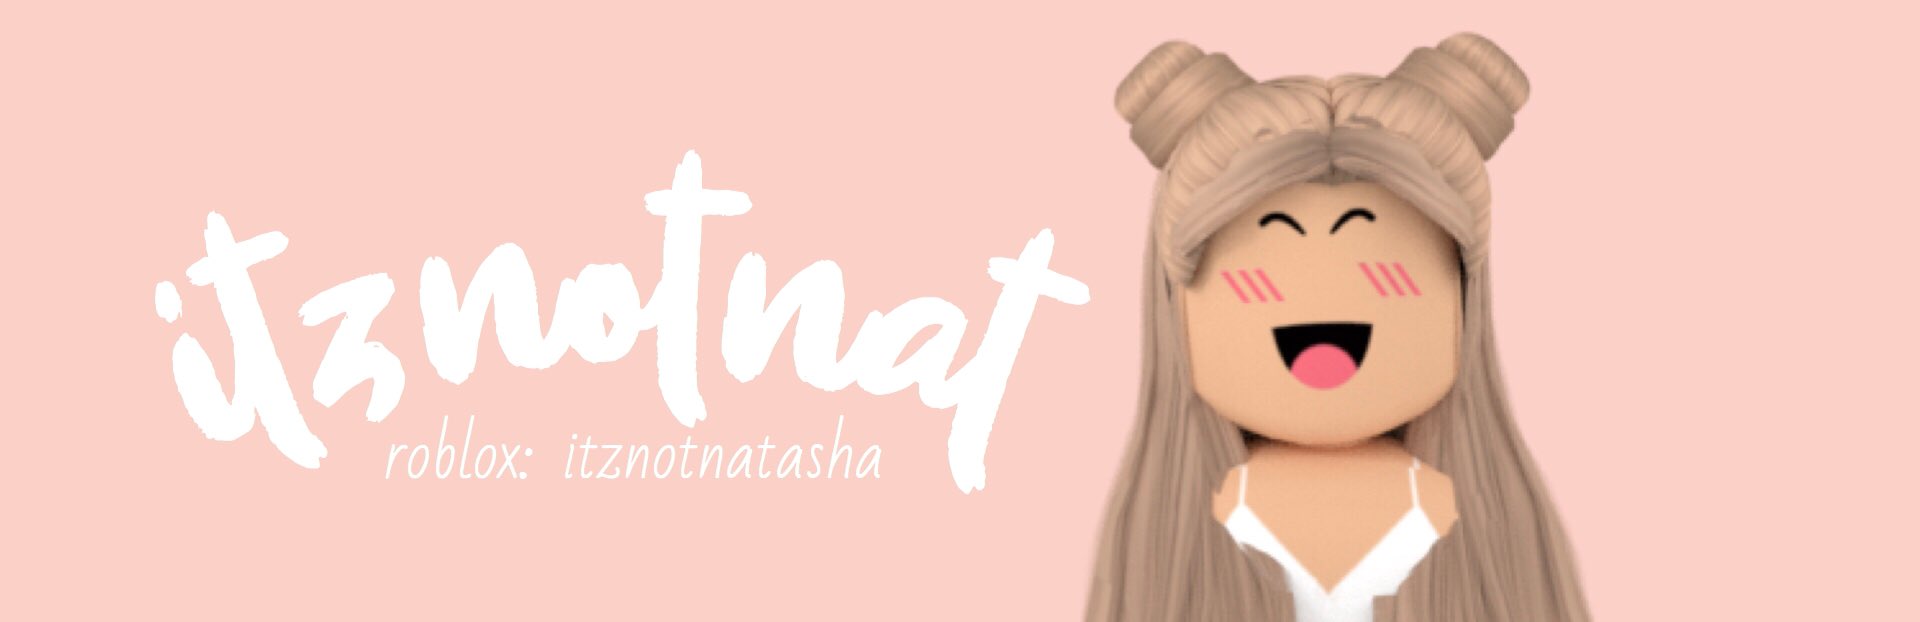 Natasha On Twitter I Guess I M Out Of My Bigger Gfx Groove So Just Came Up With A Few Different Style Gfx Banners The Pink One Is My Favourite Mainly Because Of - fhozzy on twitter roblox a gfx of my avatar i made a